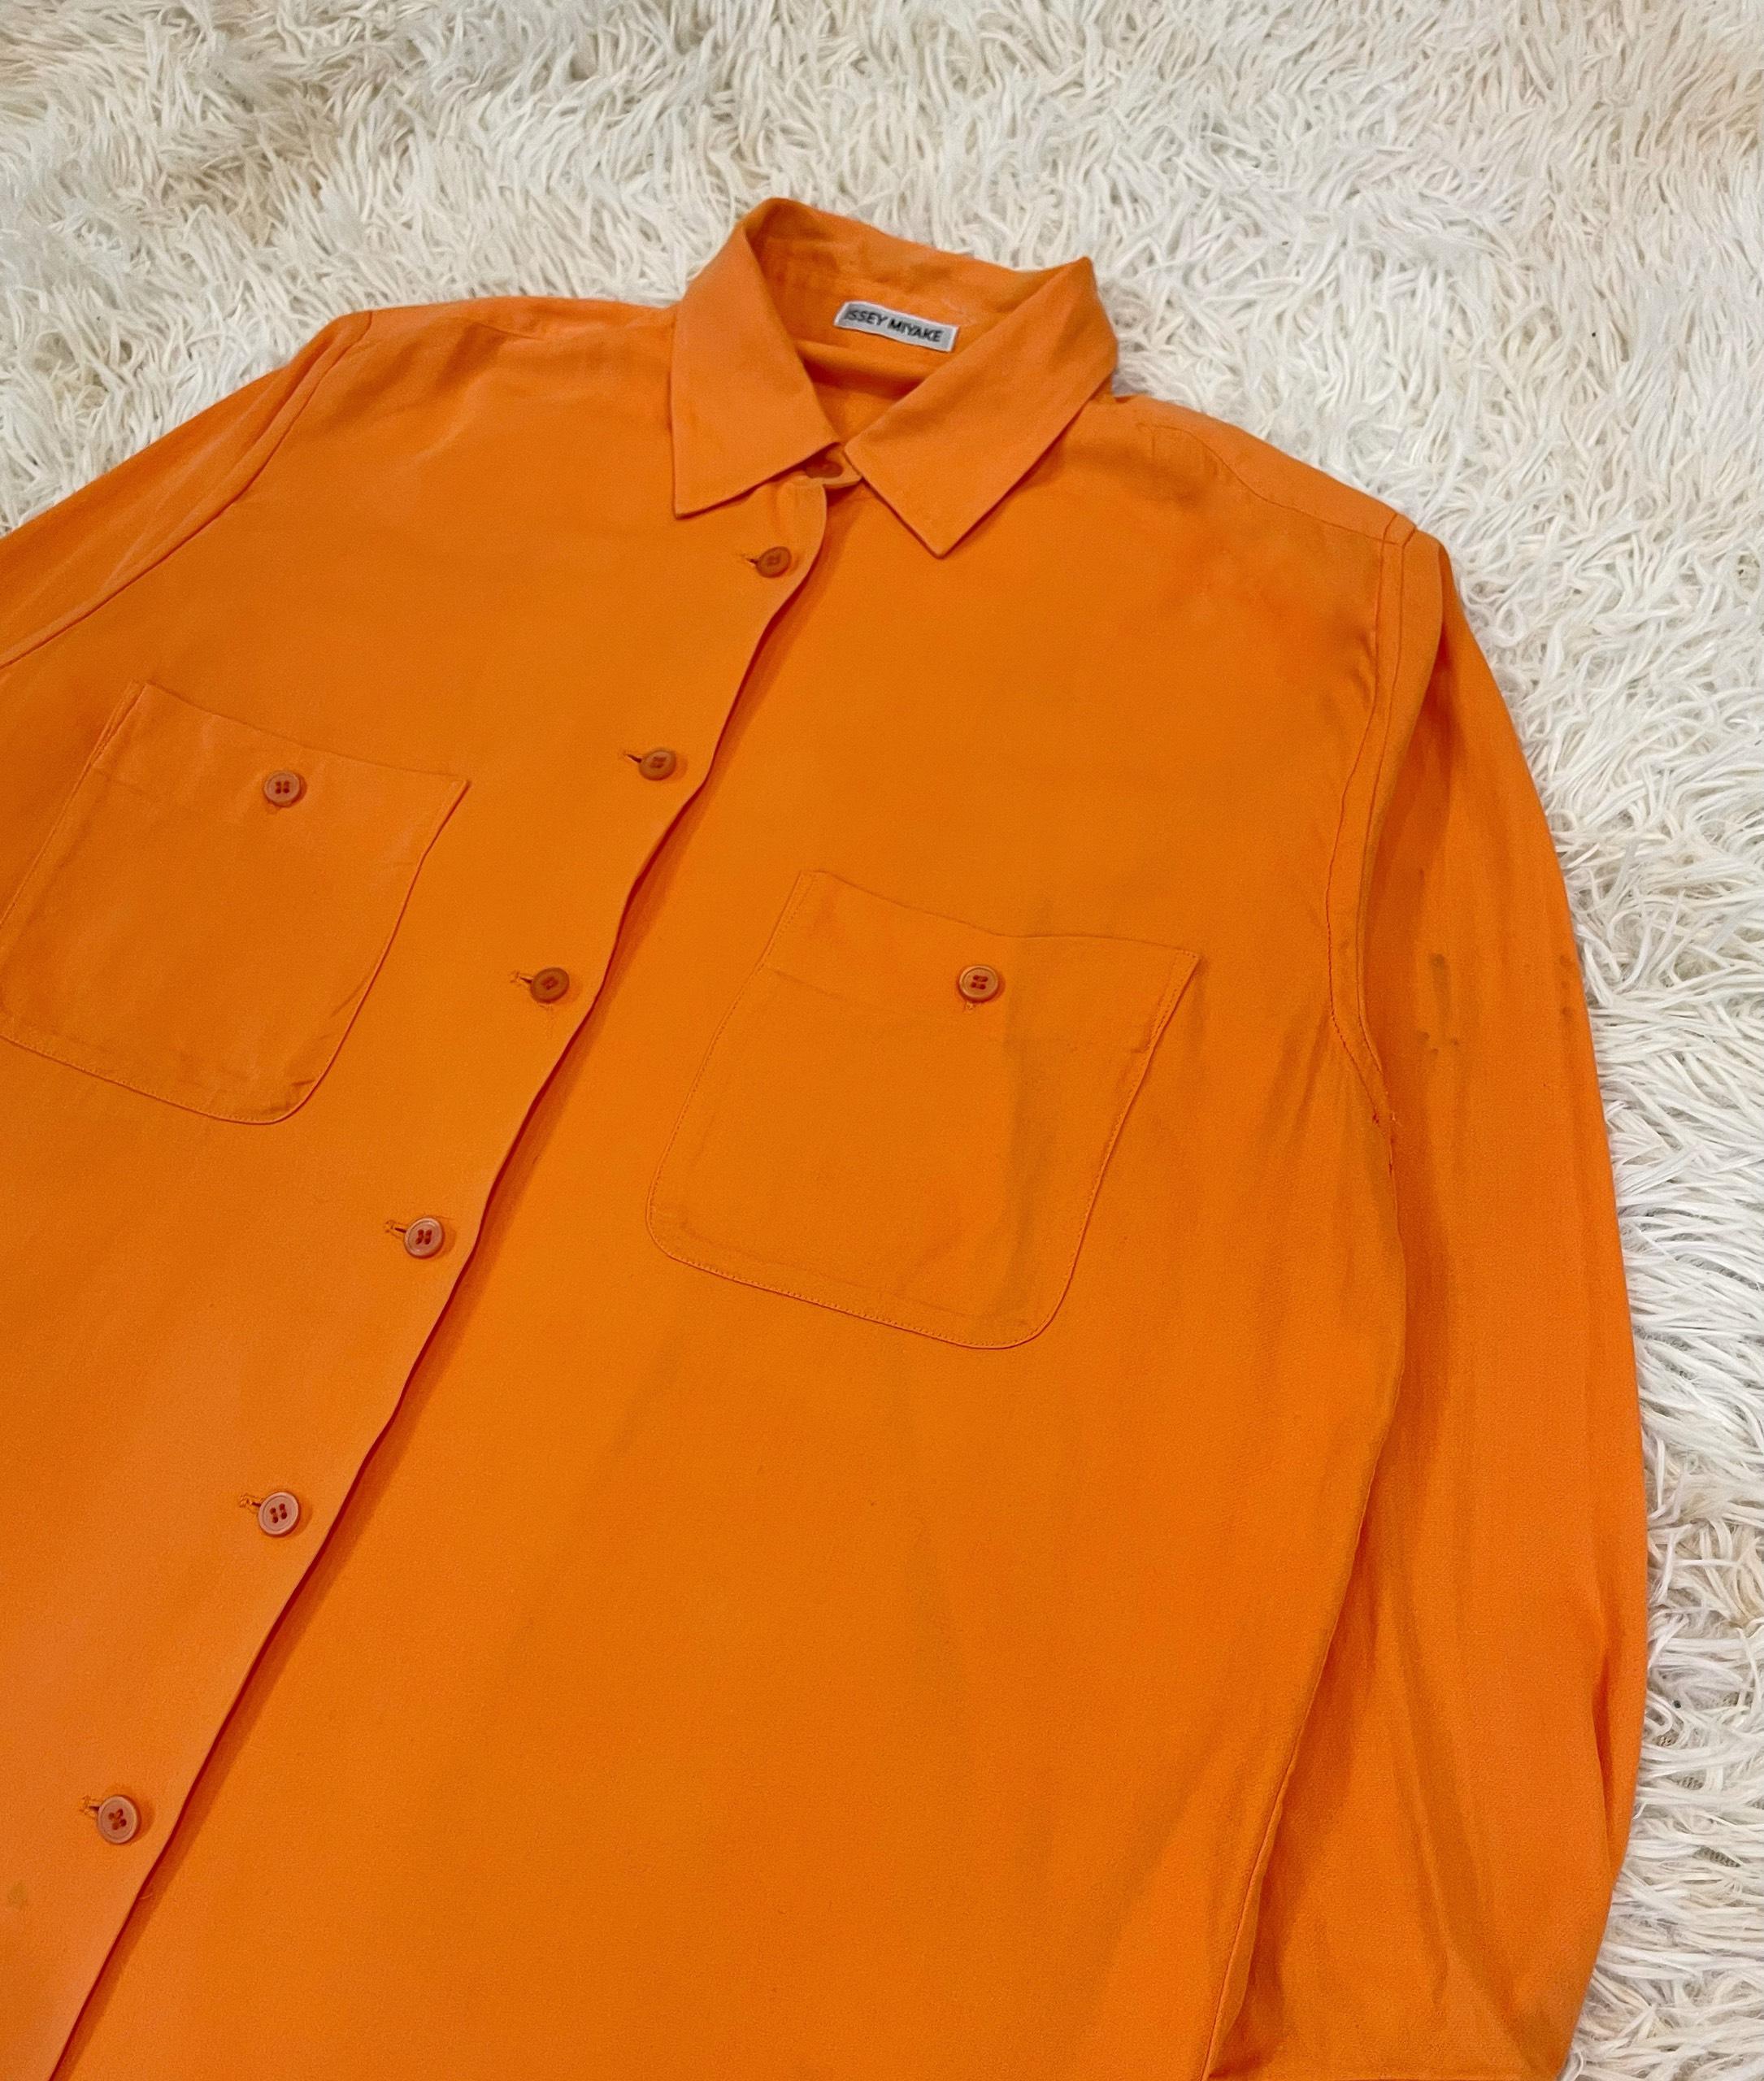 Vintage casual and easy to wear shirt from Issey Miyake mainline

Silhouette: Relaxed, casual fits

Fabric: Cotton and linen mixed

Lining: None

Season: Spring Summer 1991

Pocket: Front x 2

Weight: 200g

Color: Orange

Material:
Body: